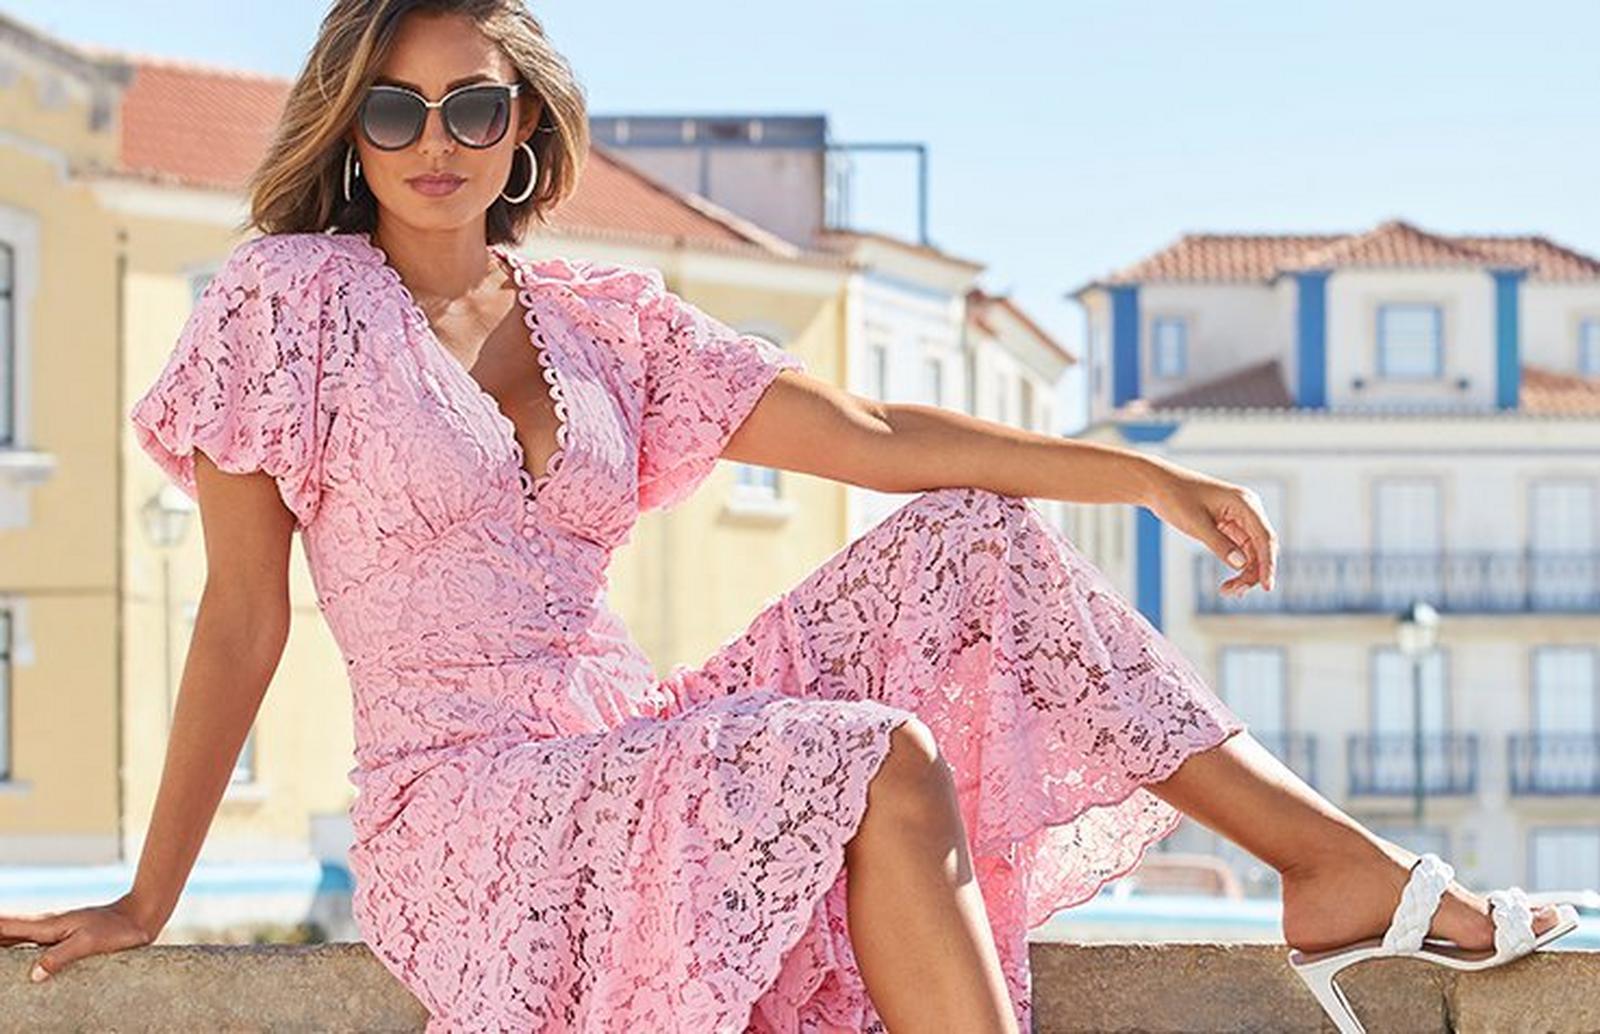 model wearing a pink lace short-sleeve maxi dress, sunglasses, silver hoop earrings, and white heeled sandals.